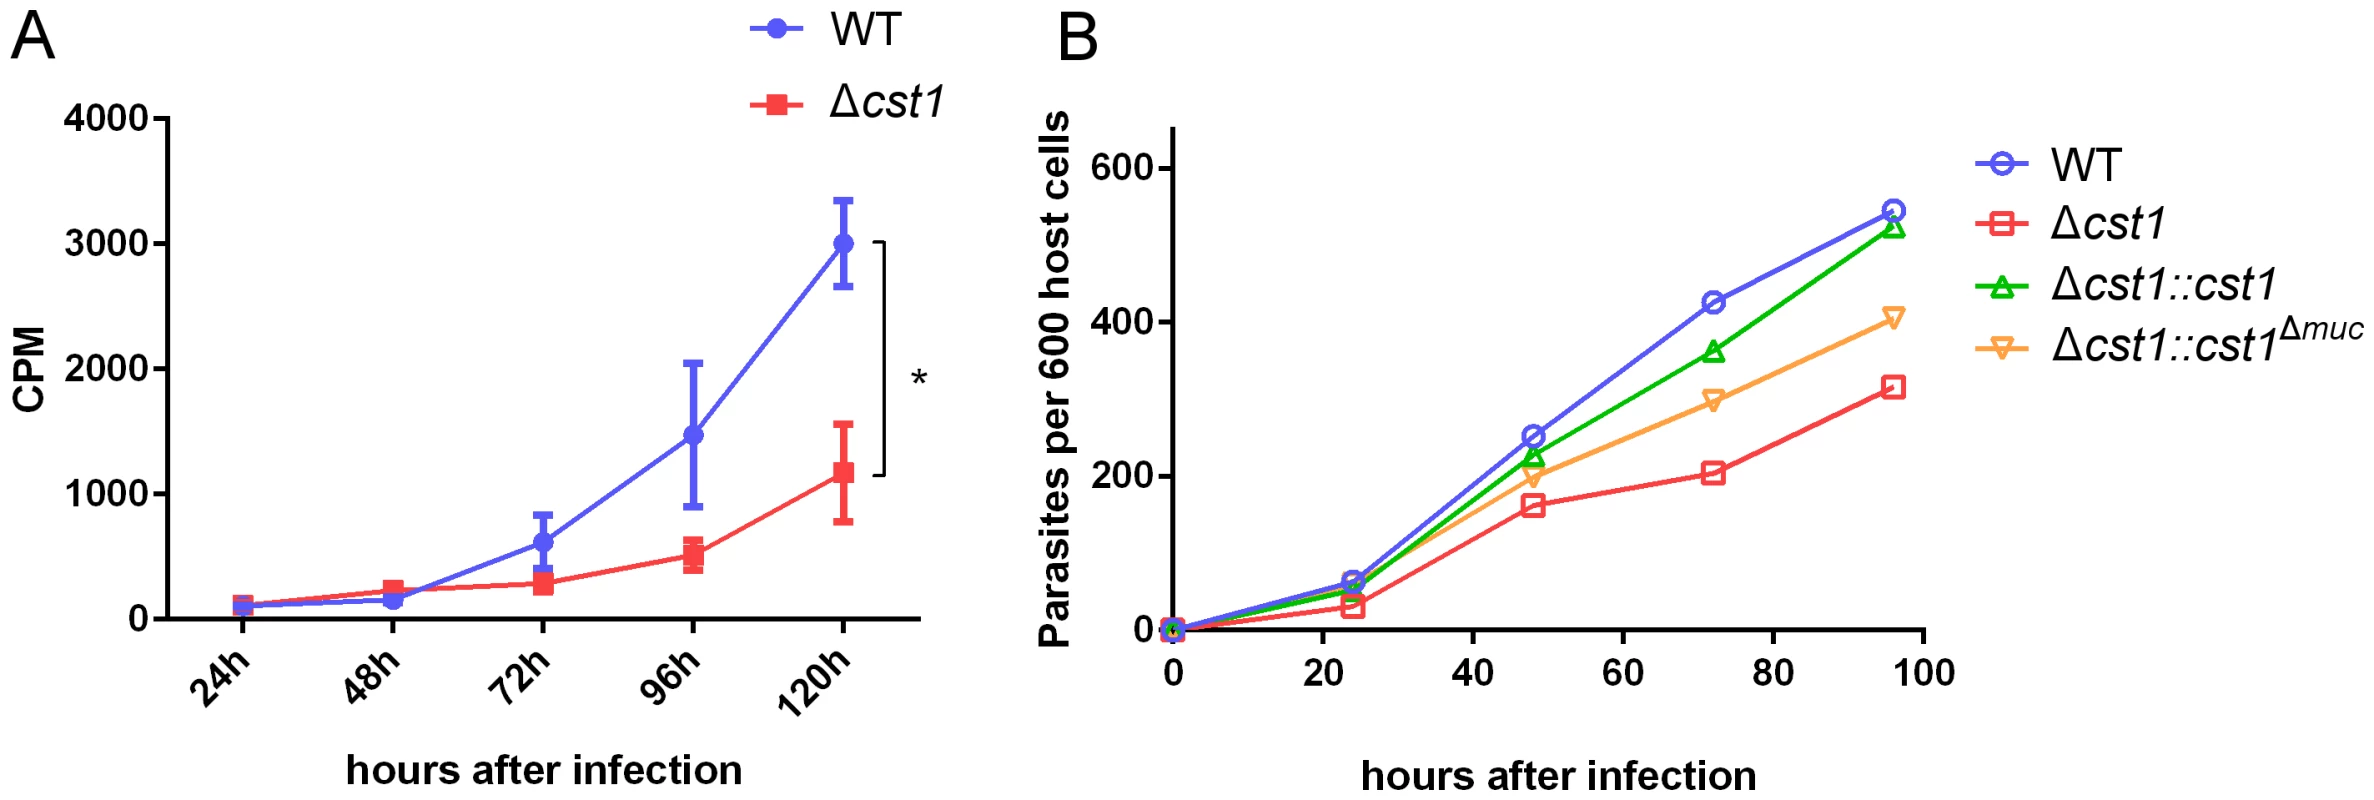 Growth of Δ<i>cst1</i> parasite is impaired at pH 8.1 but not at pH 7.1.